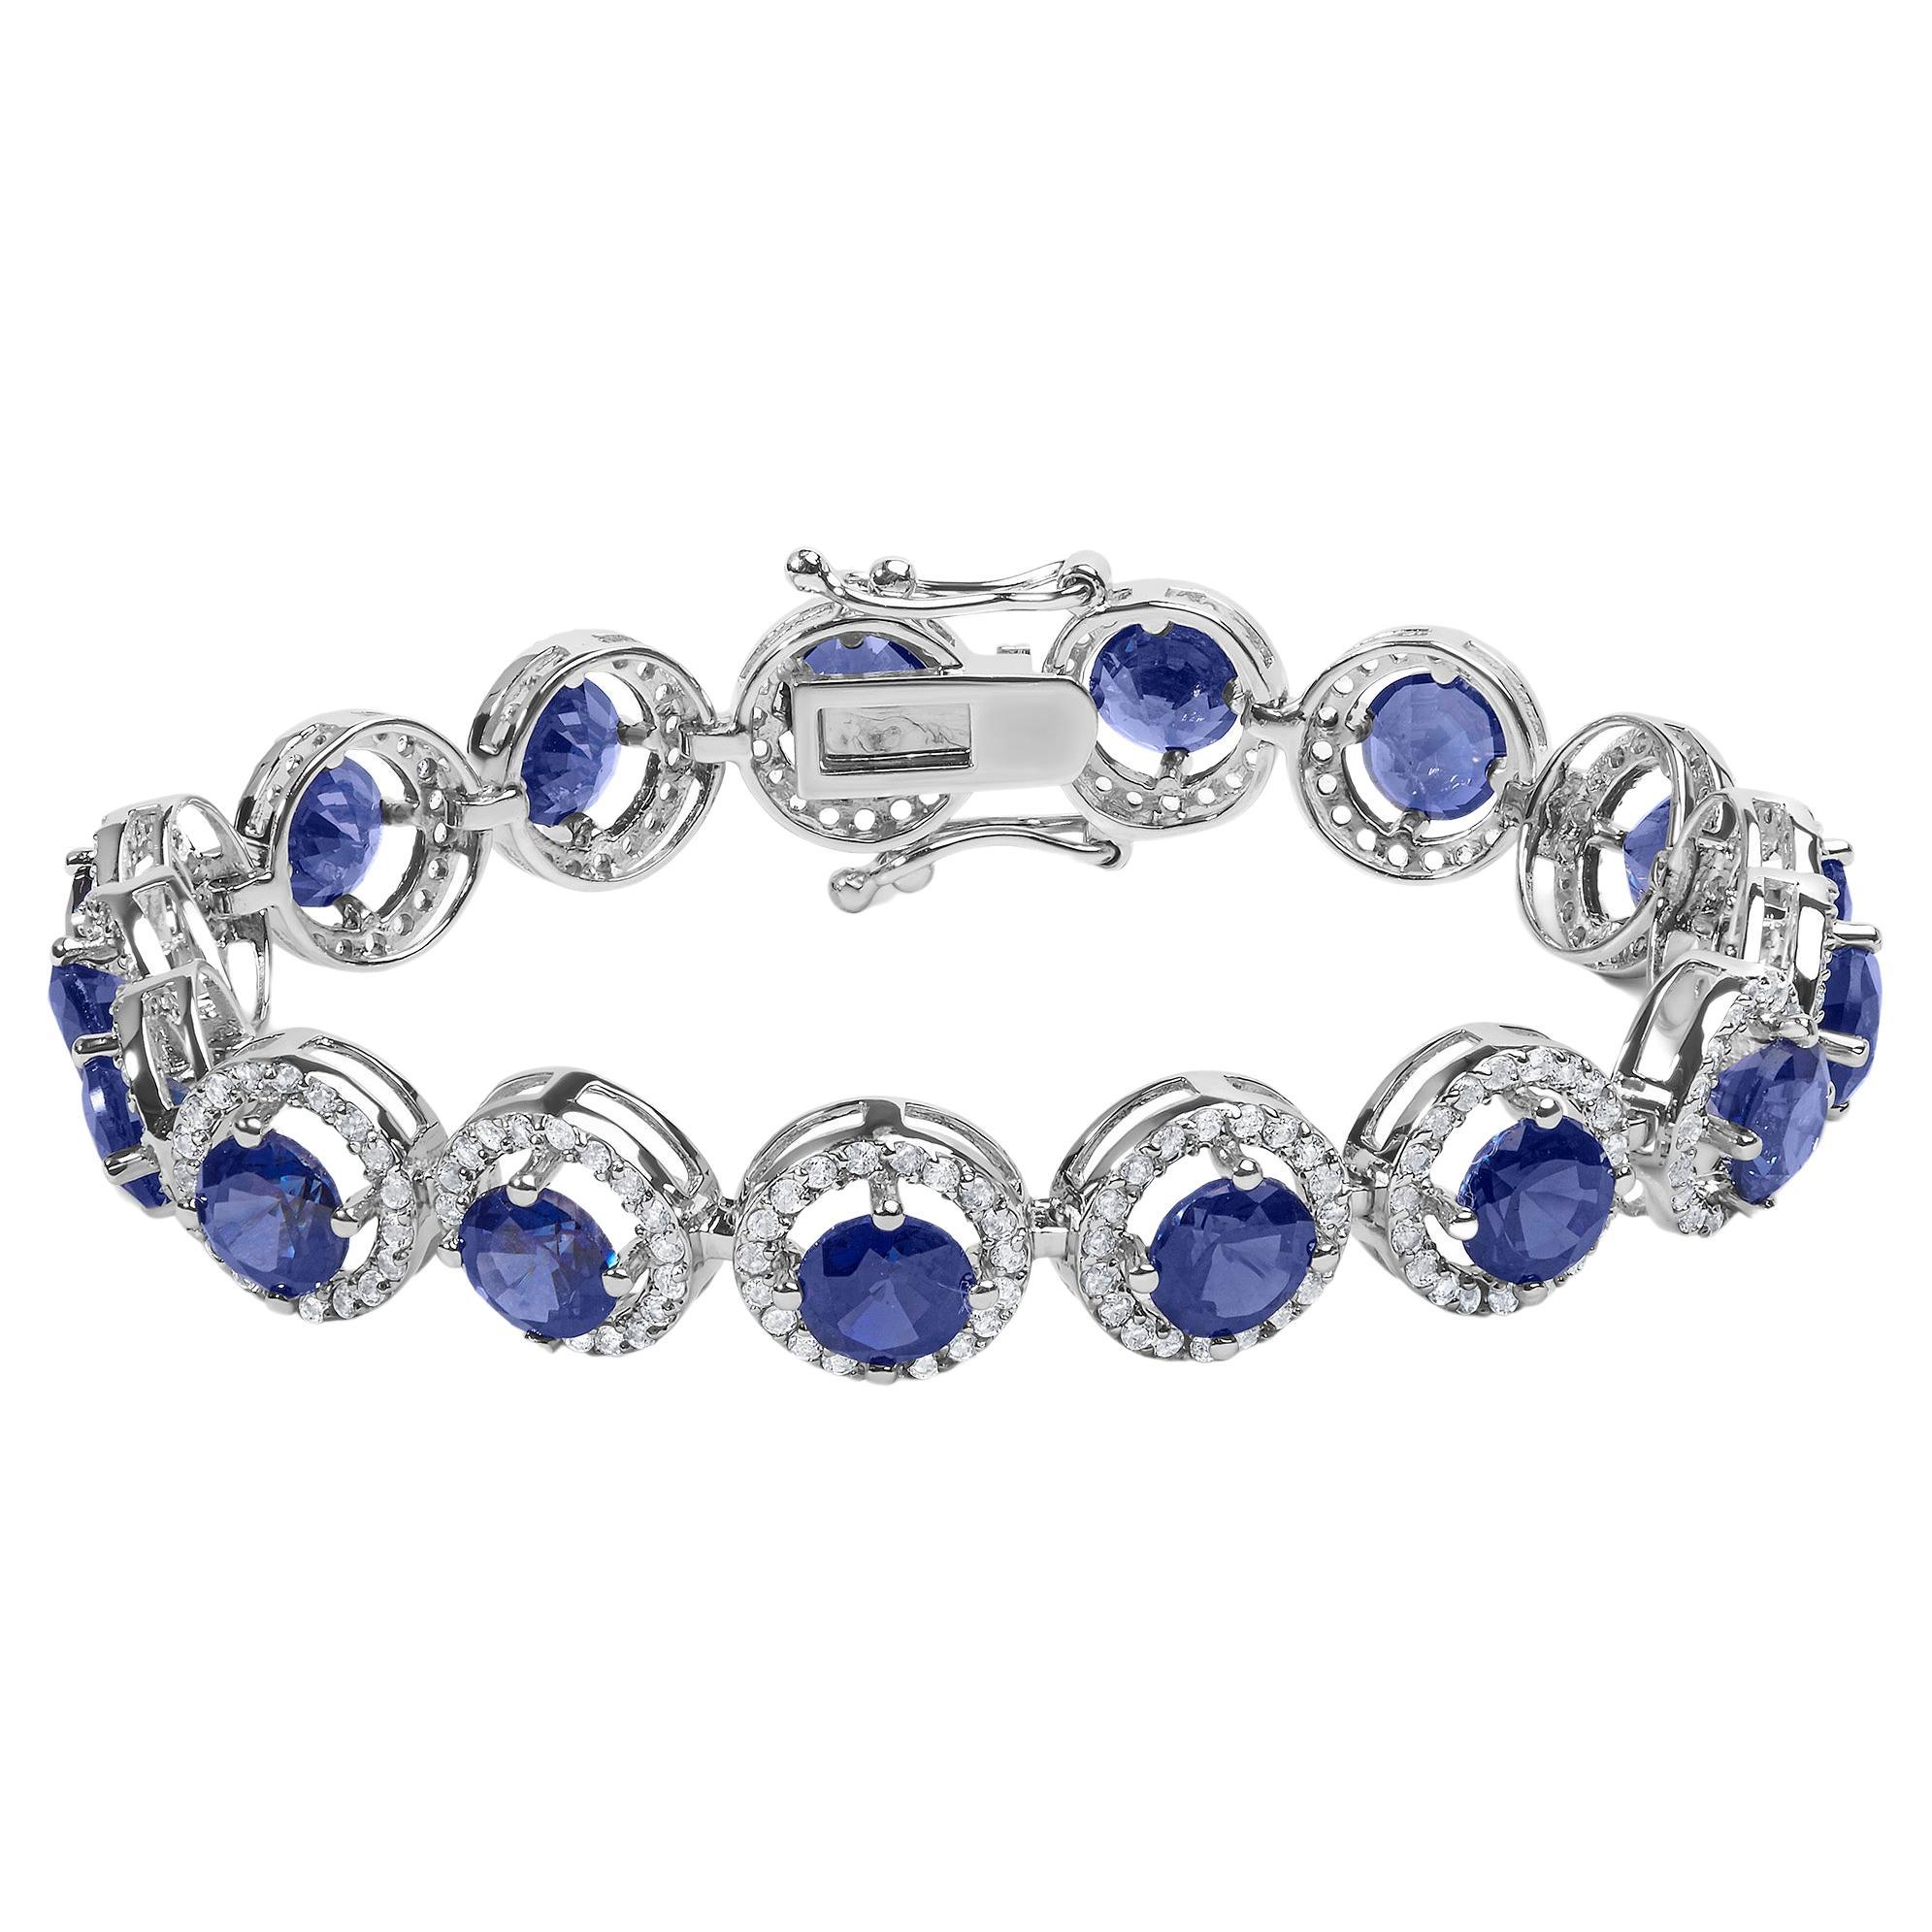 Sterling Silver 21.0 Cttw Created Blue Sapphire & White Topaz Halo Link Bracelet